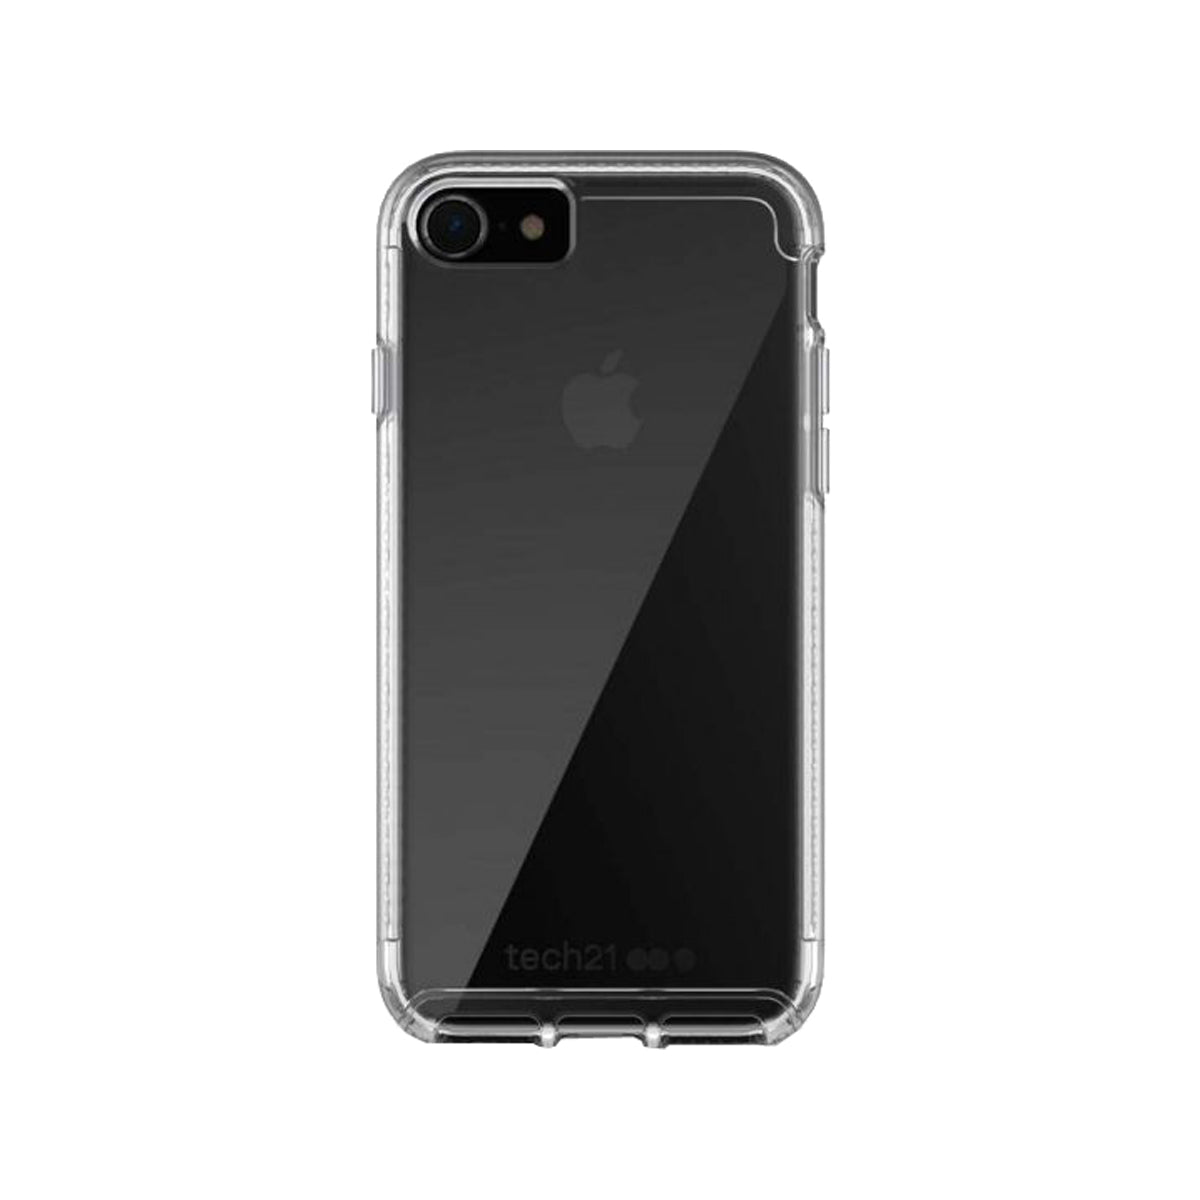 Tech21 Pure Clear Phone Case for iPhone 7/8/SE Gen 2/3 - Clear.